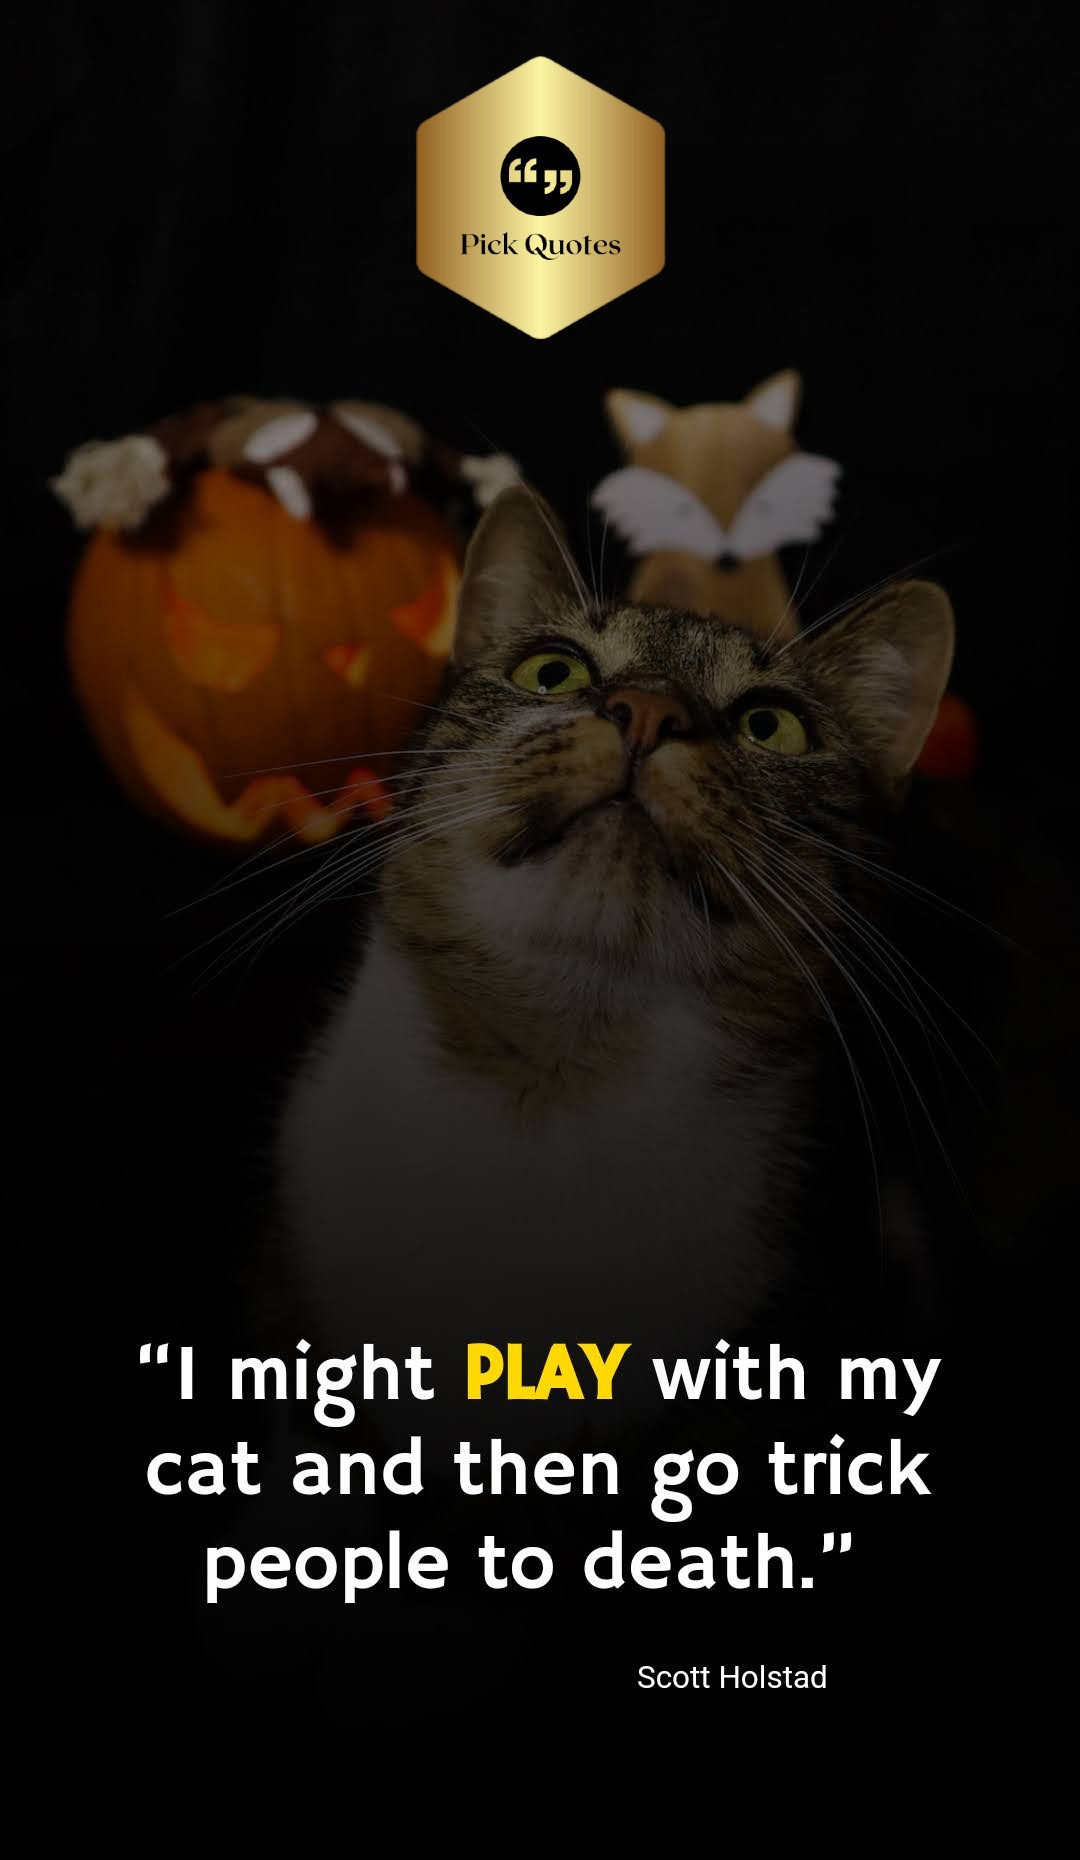 Best short Halloween Quotes From-Movies-thepickquotes.com